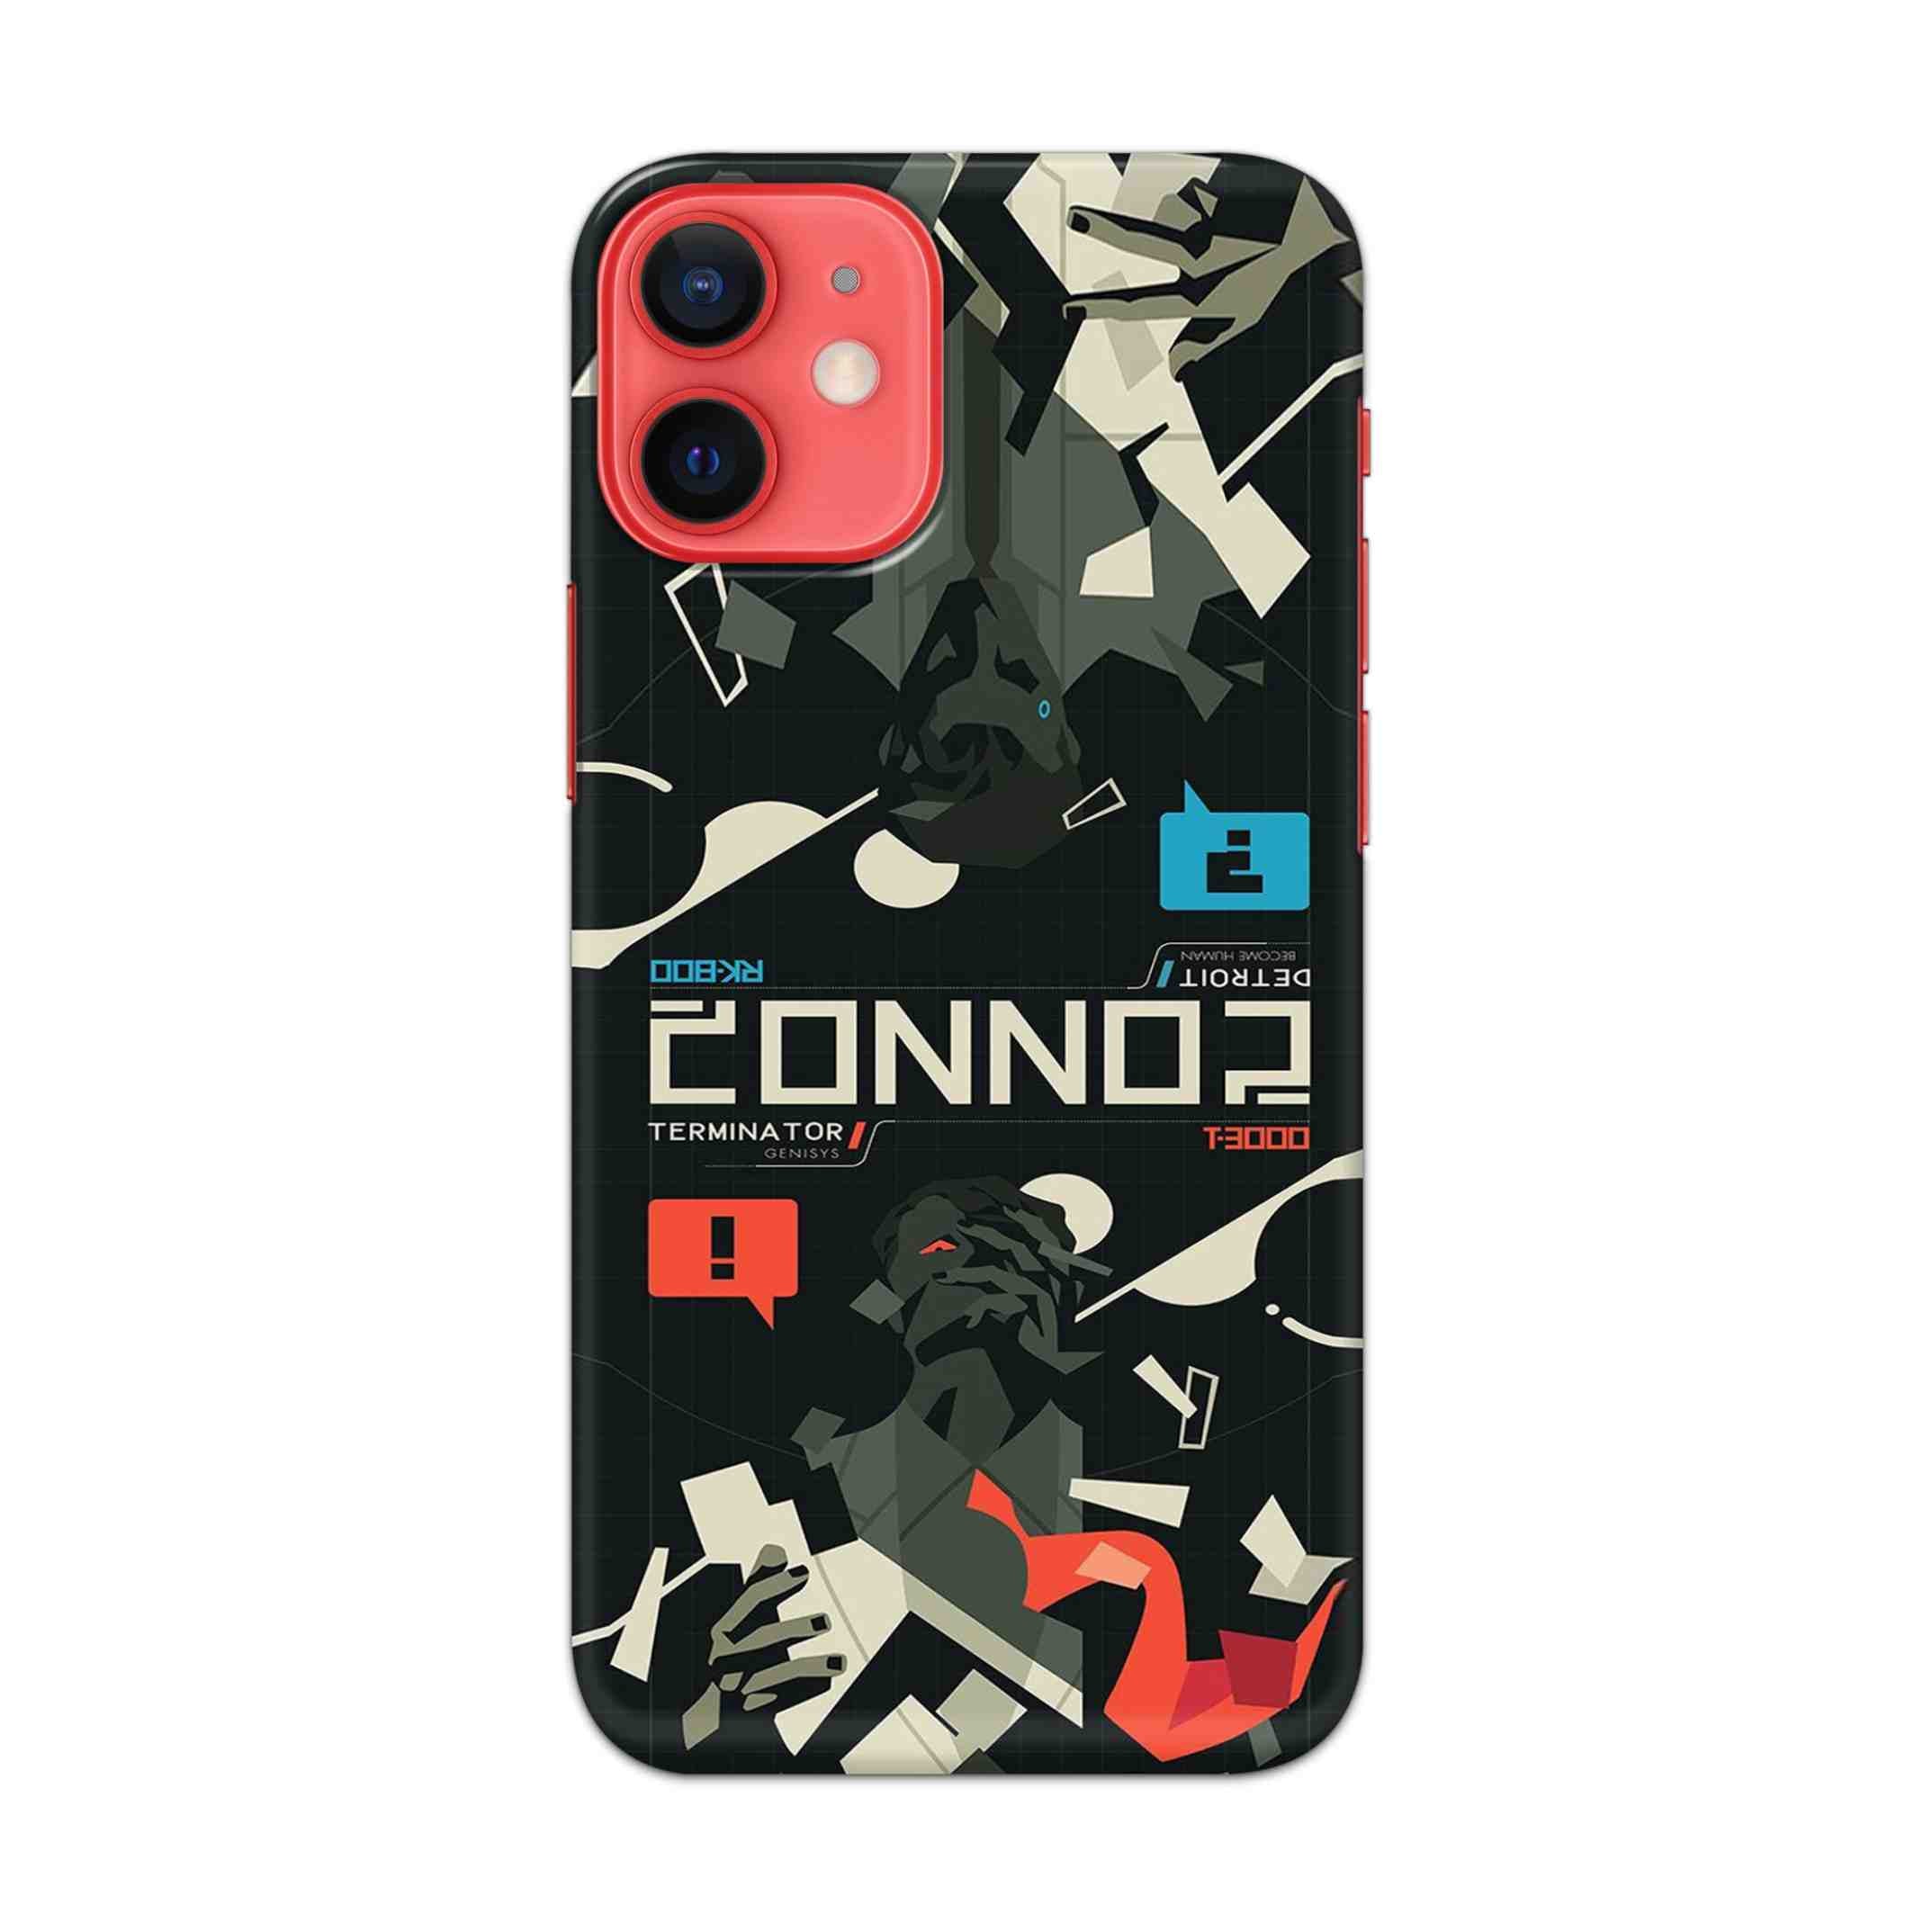 Buy Terminator Hard Back Mobile Phone Case/Cover For Apple iPhone 12 Online